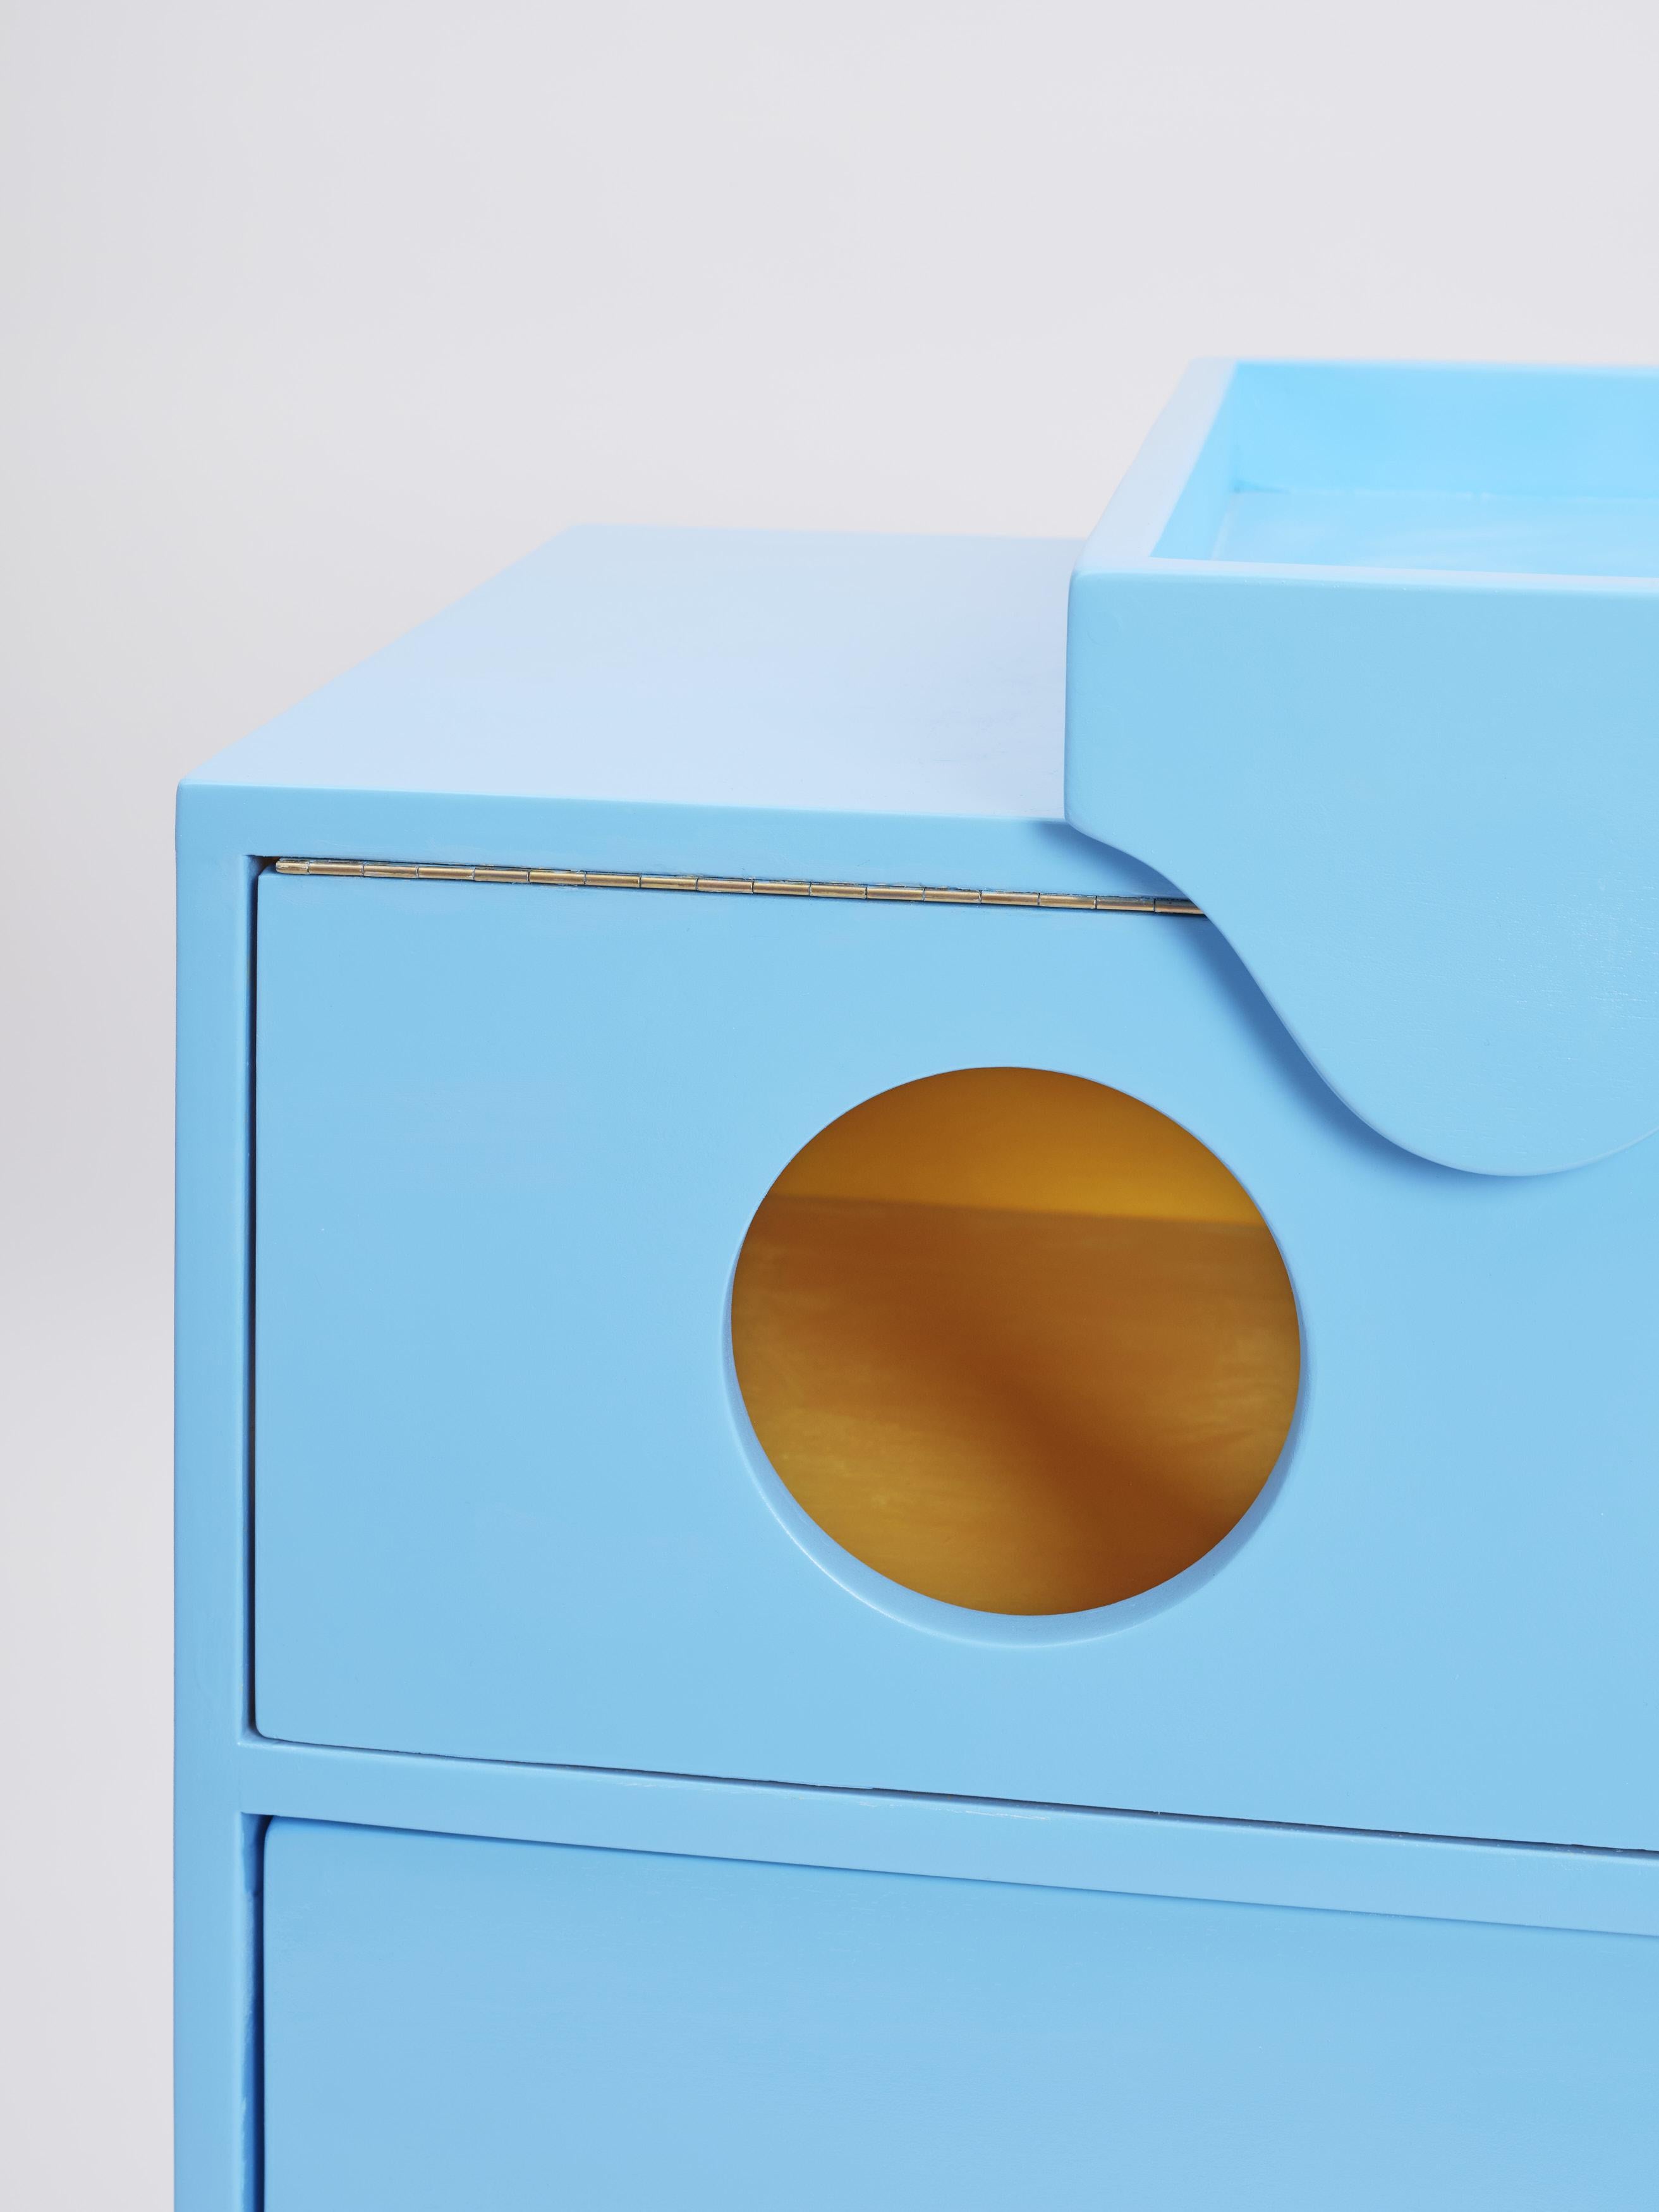 A cabinet for storage.
A changing table for babies.

The “SALAMONDA” was designed as a storage unit and changing table for babies.
The wave shaped top can be taken off and work as a tray for clothes and diaper change for babies, 
whilst the